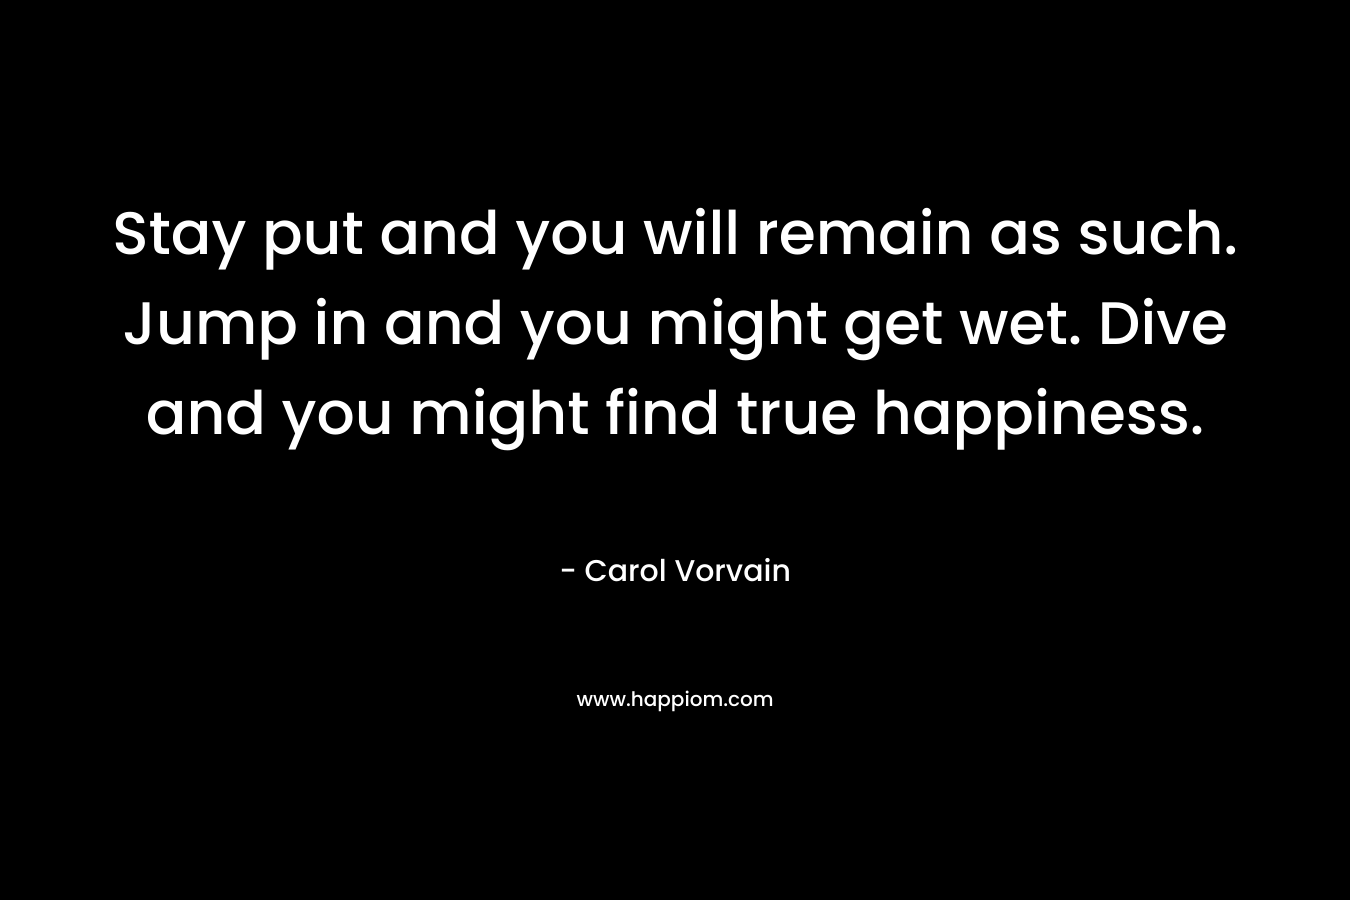 Stay put and you will remain as such. Jump in and you might get wet. Dive and you might find true happiness. – Carol Vorvain